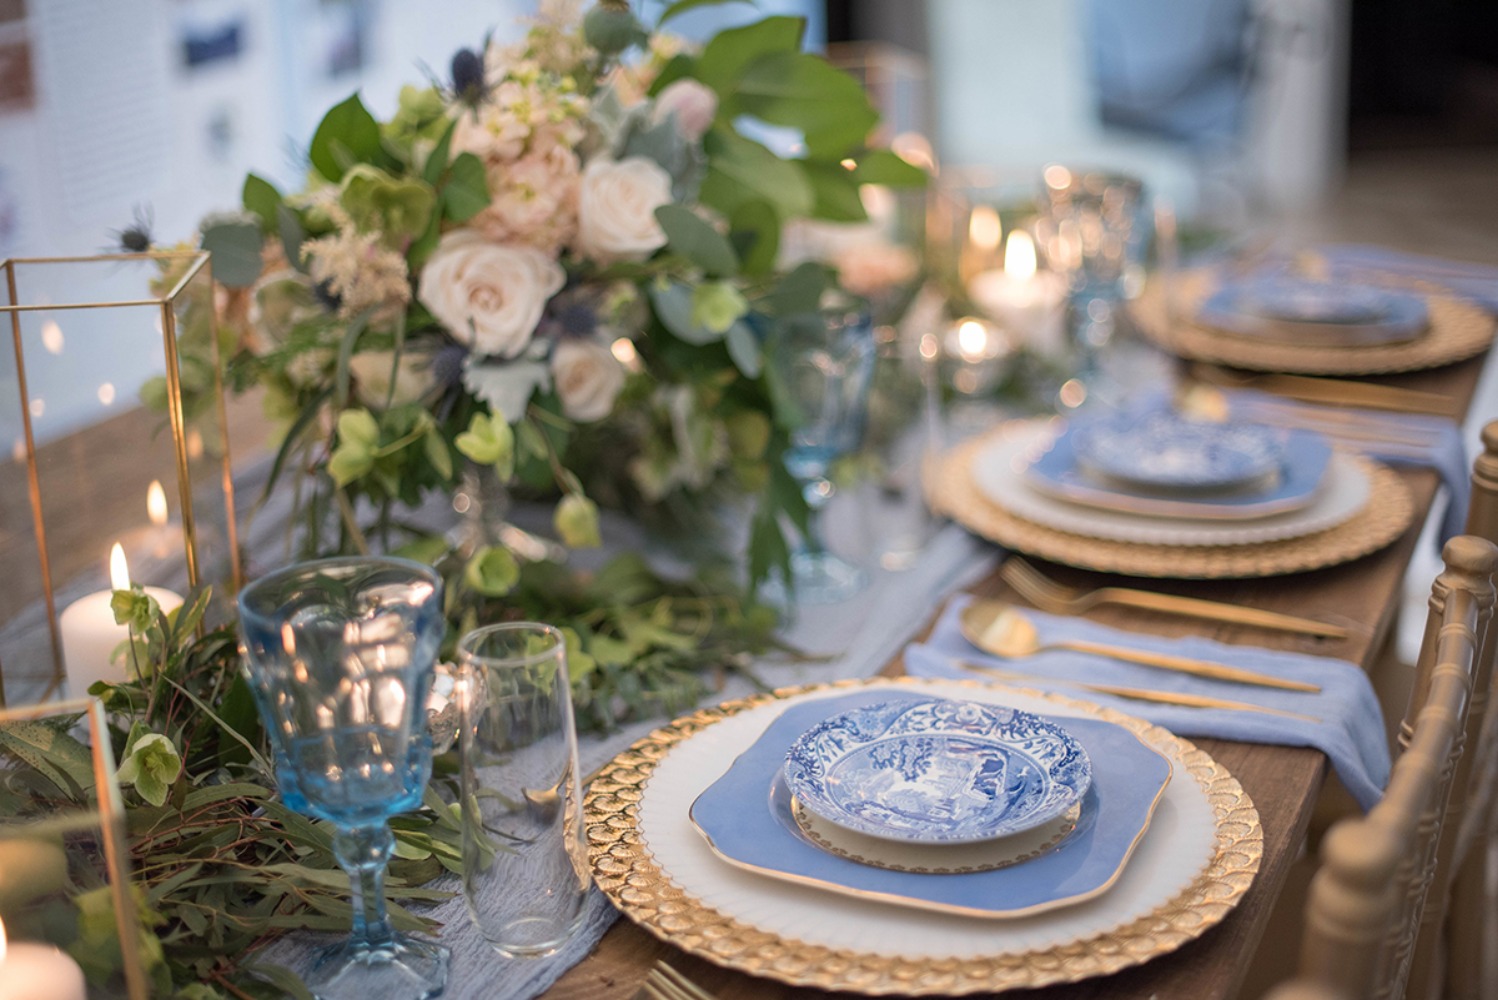 How To Have A Dusty Blue Wedding During Any Season